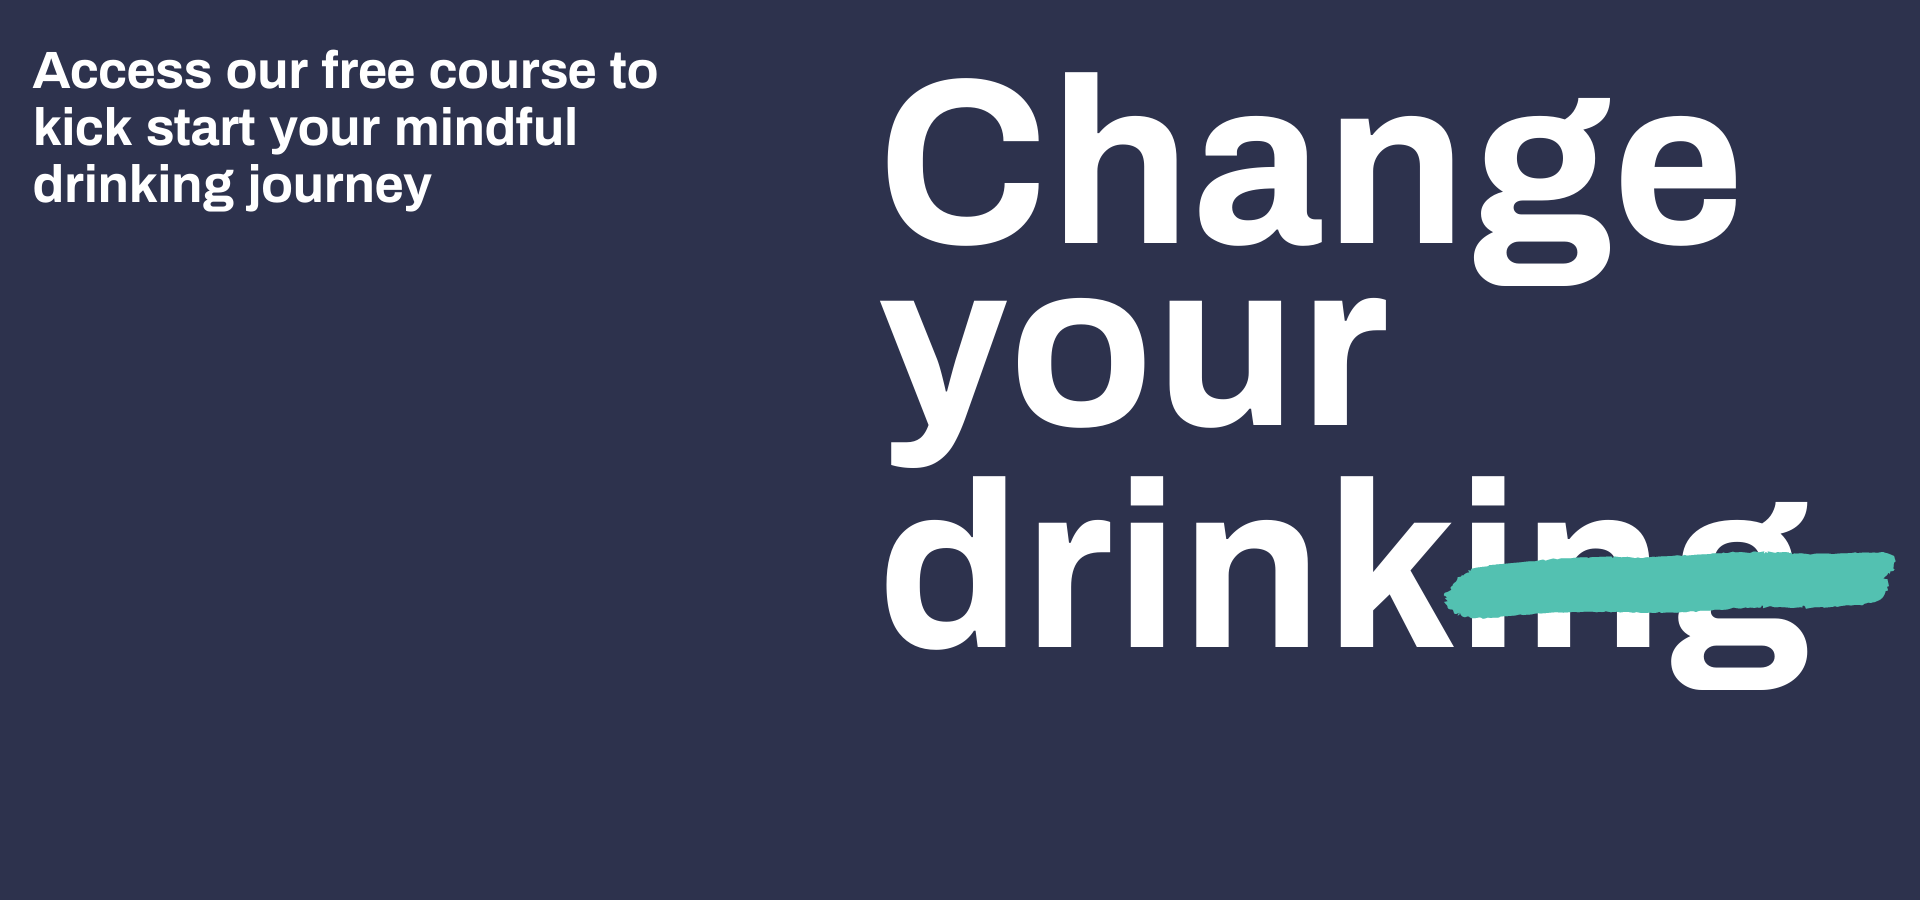 Change your drinking